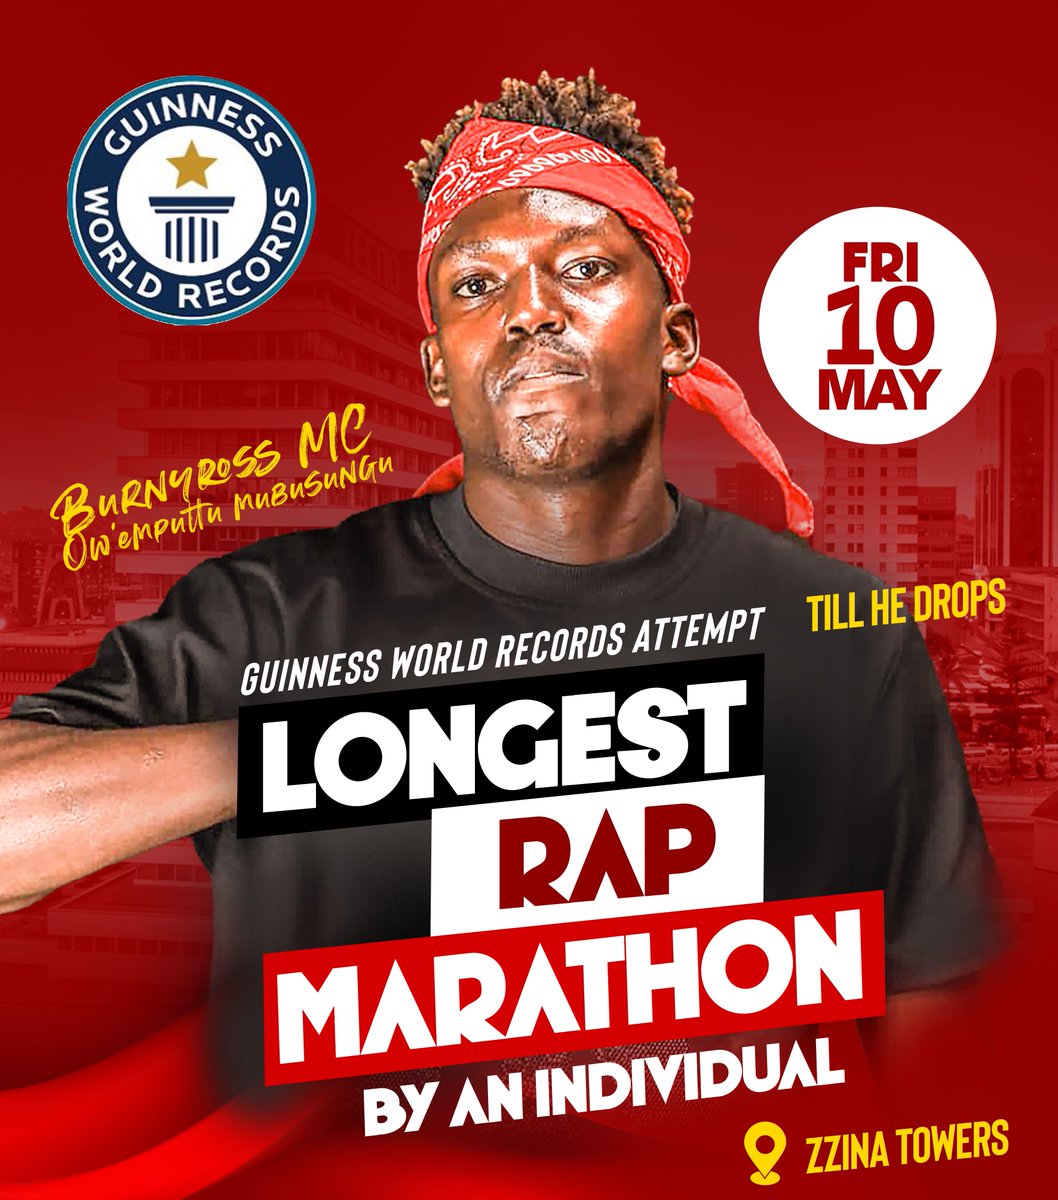 Rapper @burnyross_mc will be attempting to break the @GWR Longest Rap Marathon this Friday, starting at 9:00 AM 

The event will be taking place at the Zzina Towers in Kansanga 

#BurnyrossMCWorldRecord | #ZzinaLifeStyle